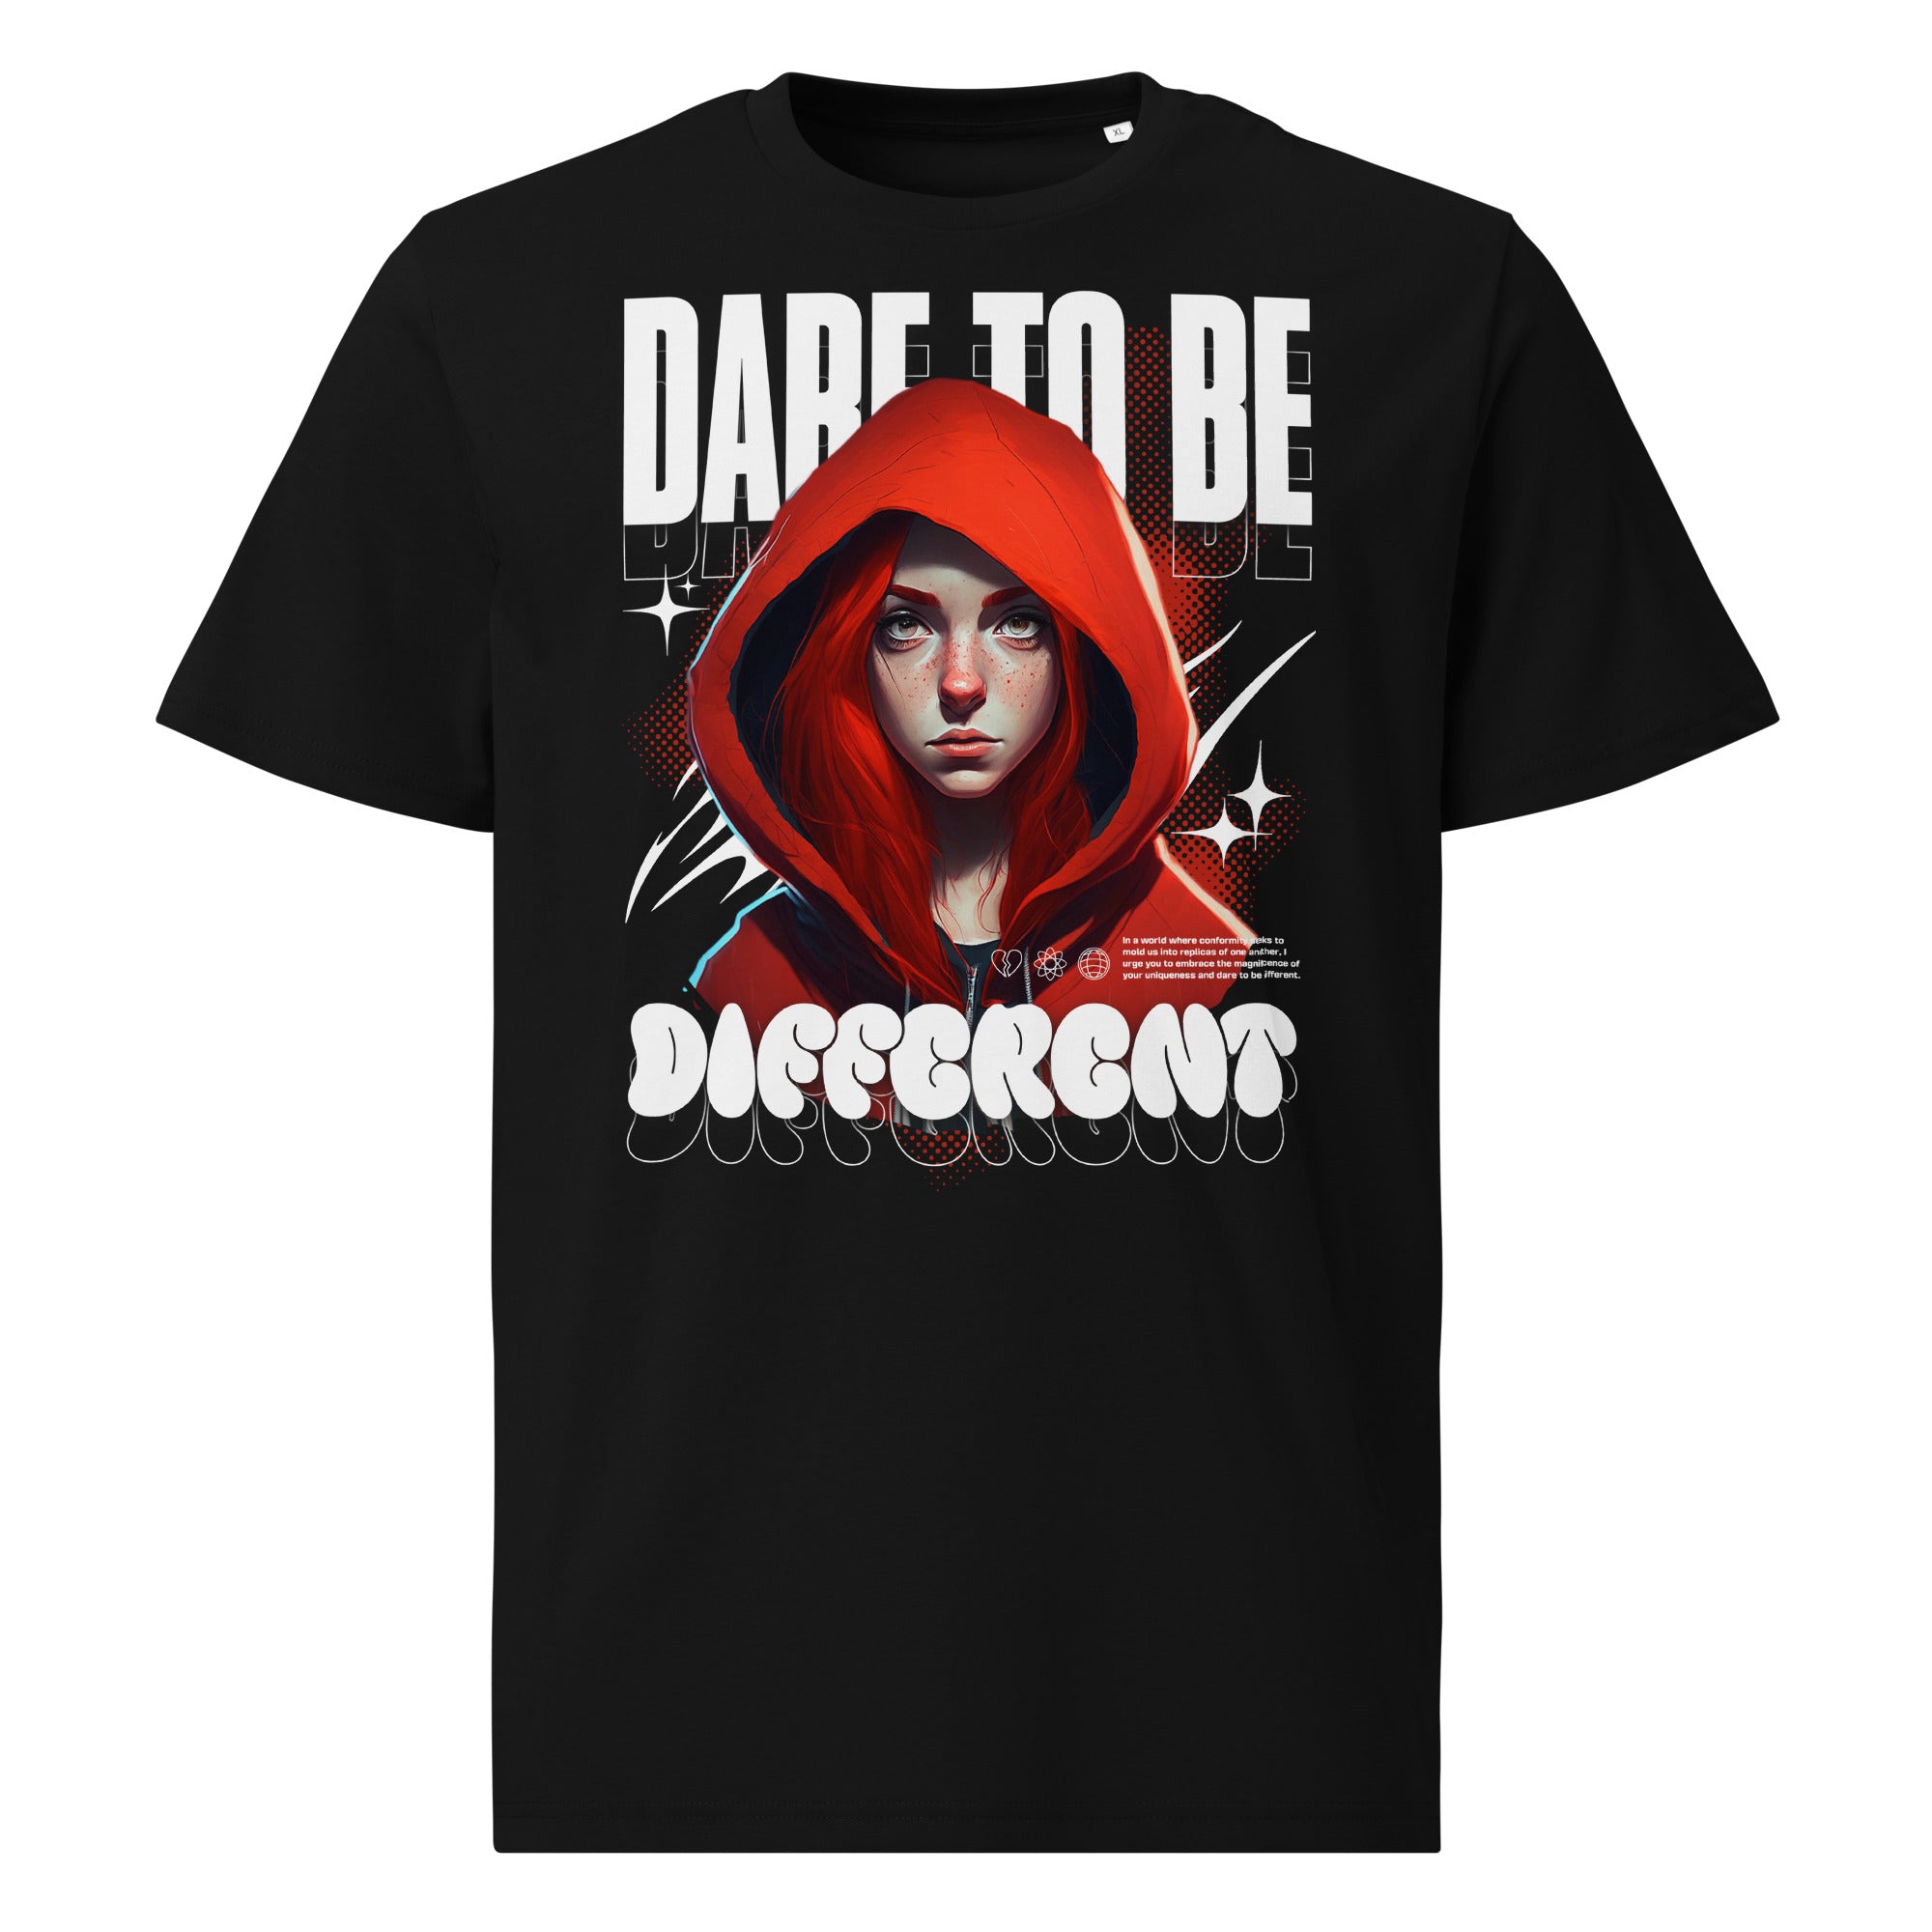 Dare to be Different Women's t-shirt